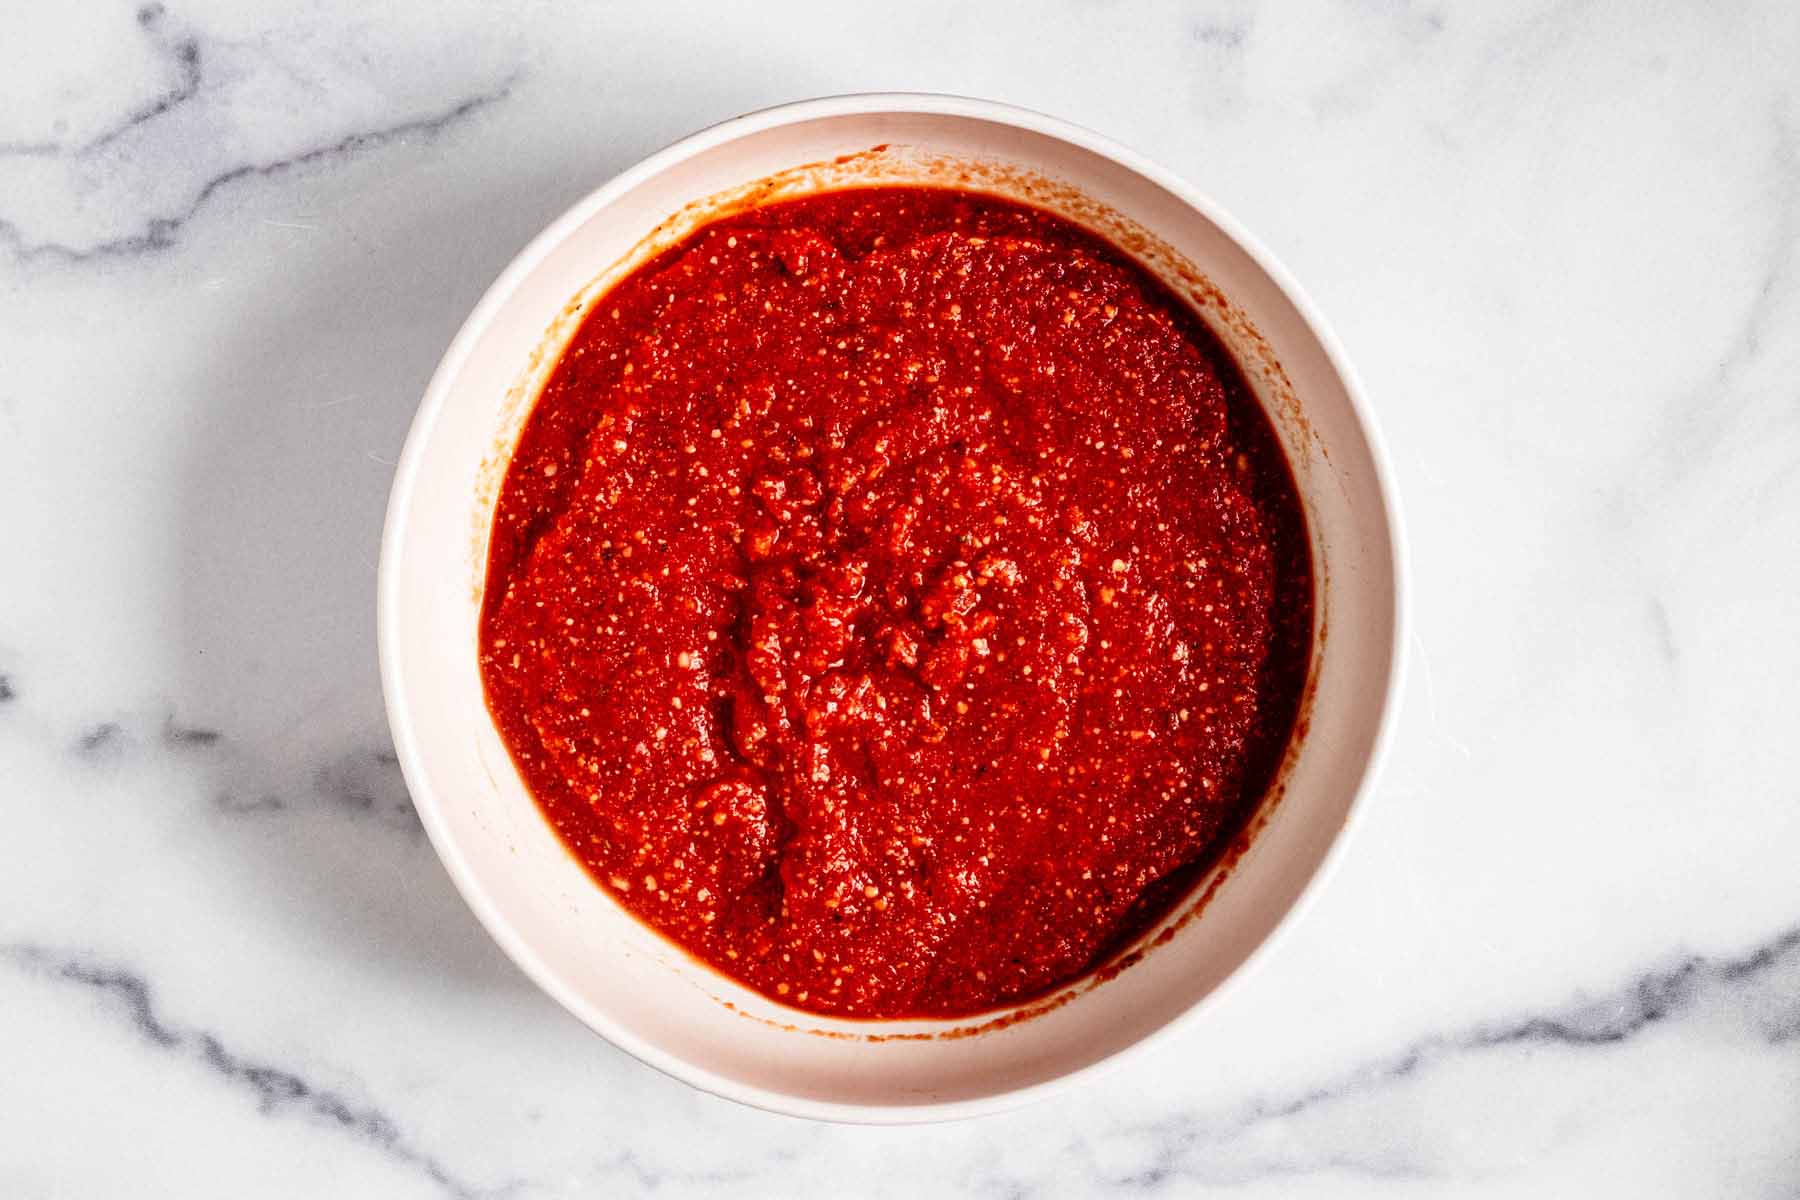 All pizza sauce ingredients combined in a white bowl